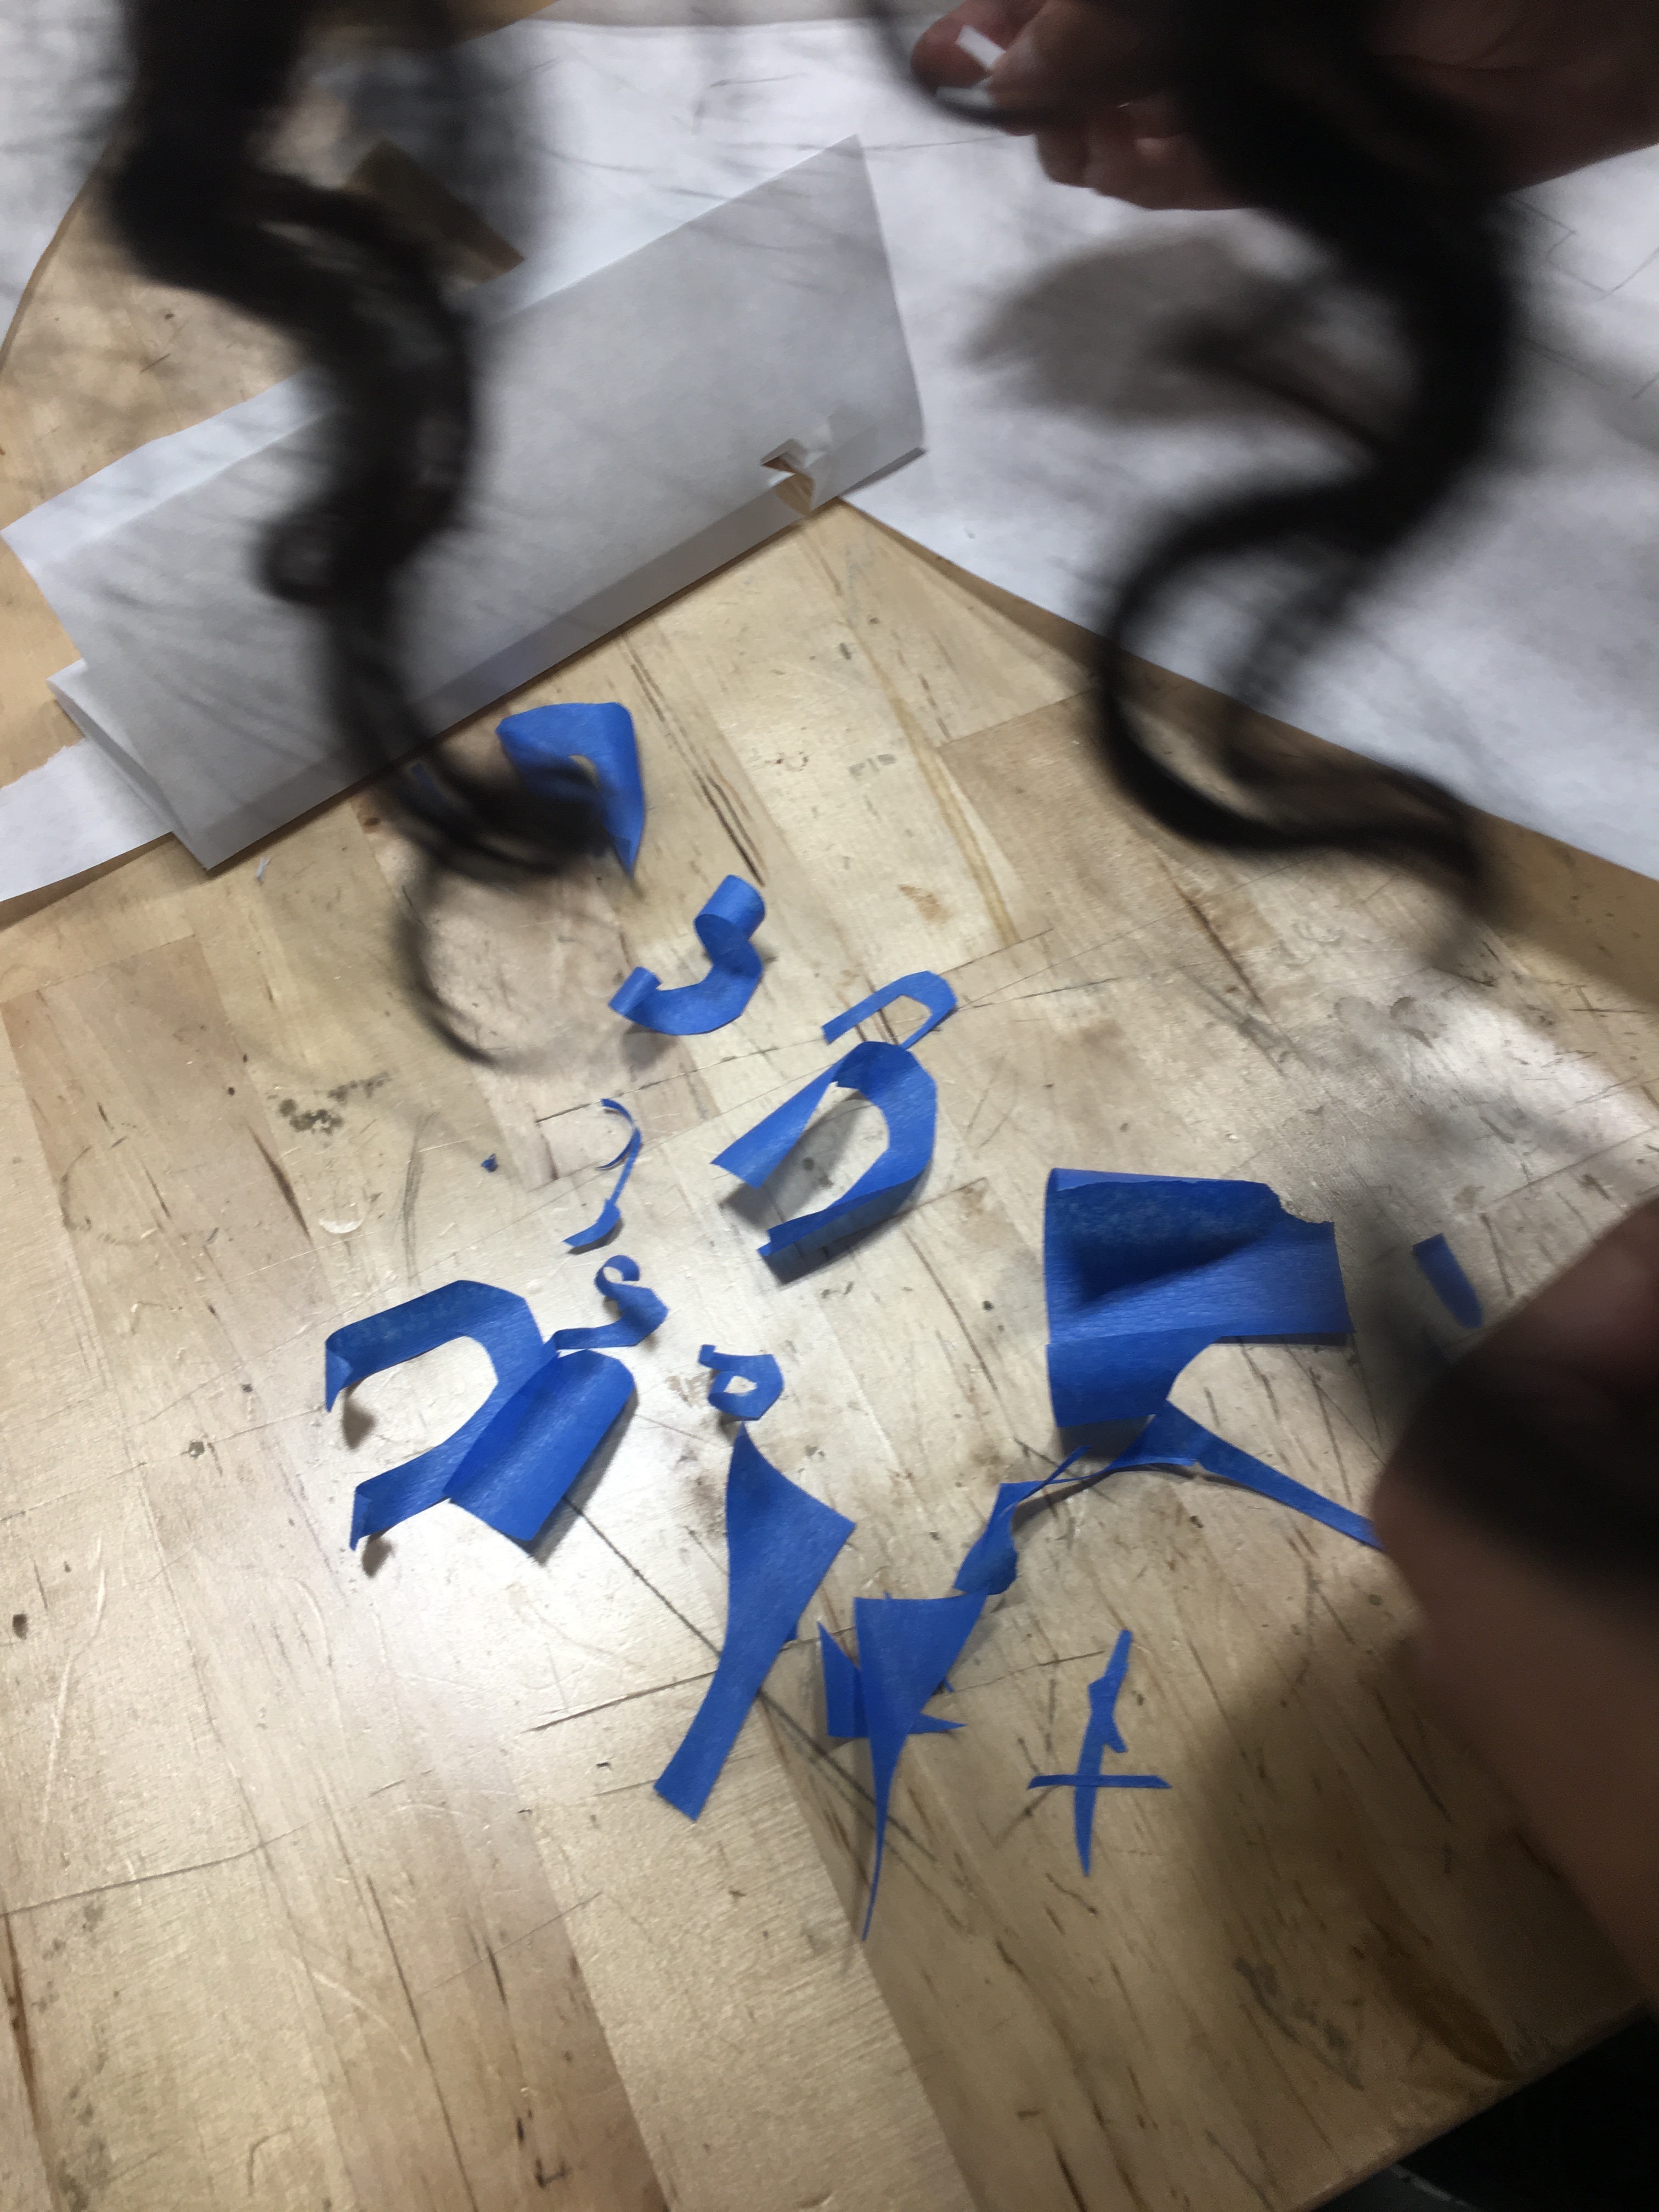 Tape is easy to work with and its curling works well with letterforms